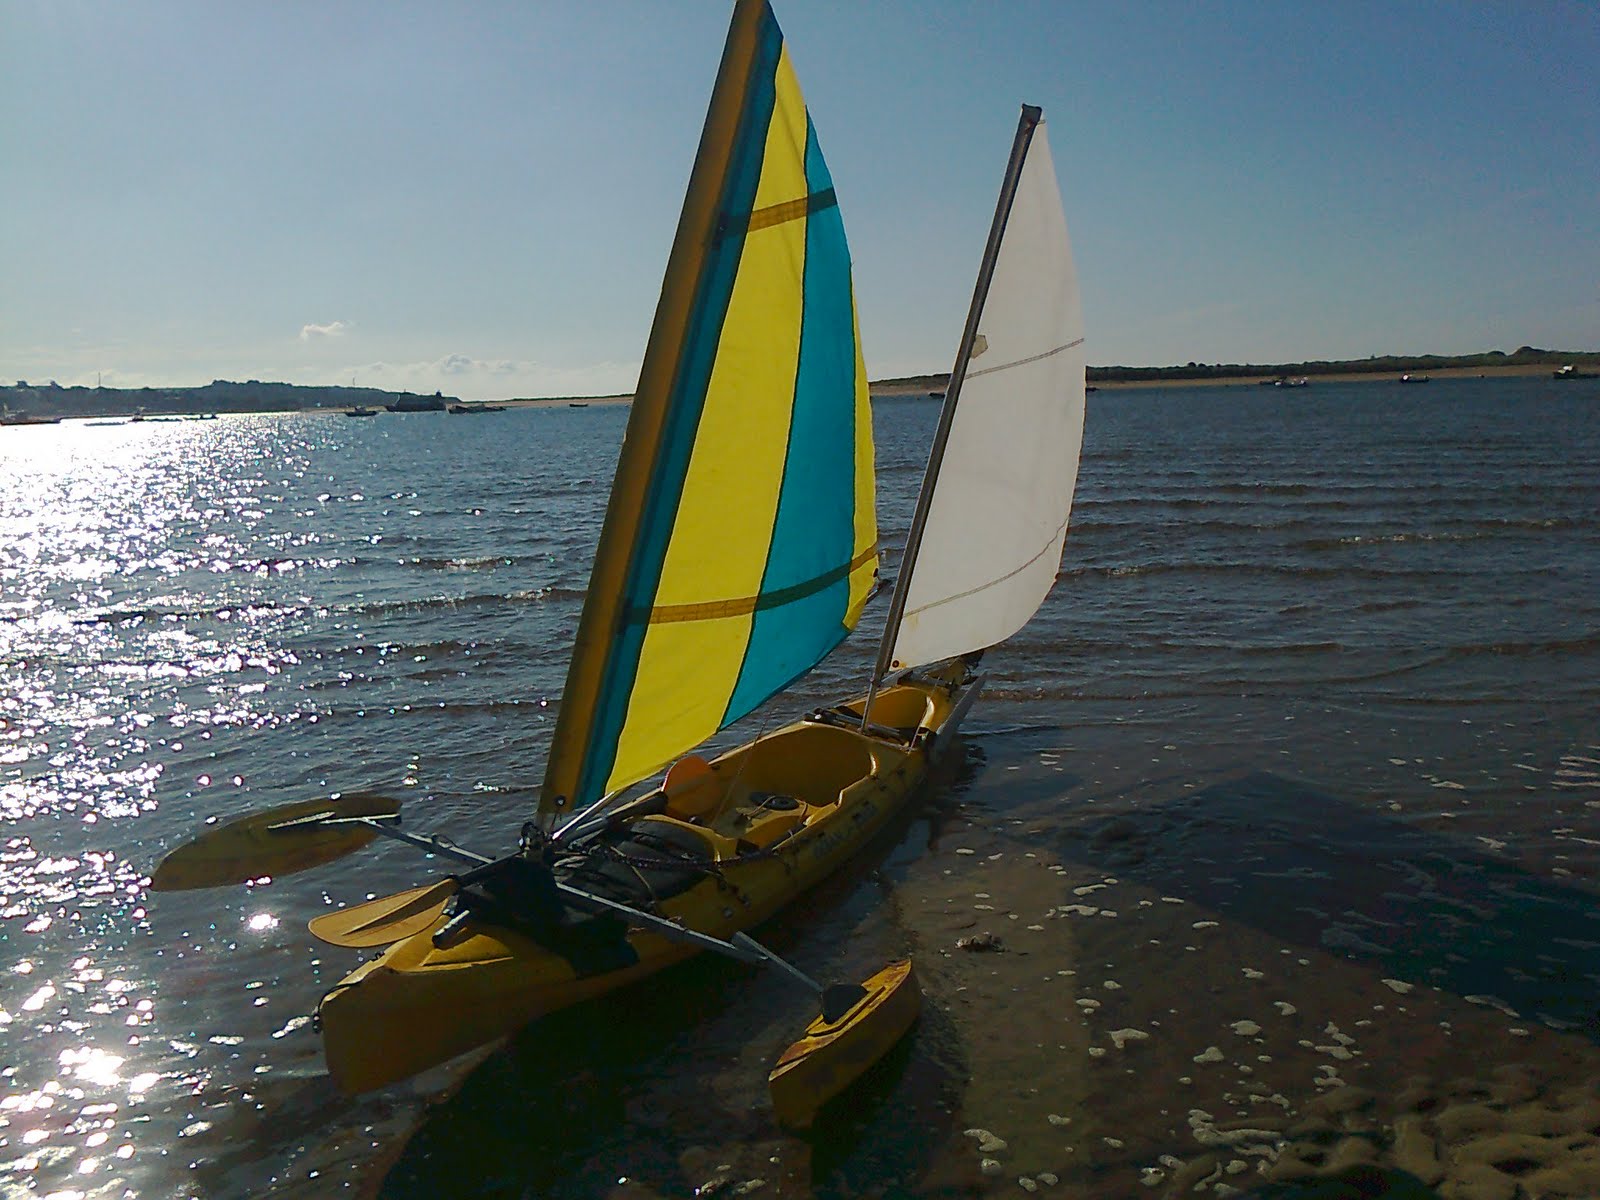 Kayak Sailing and boat building projects